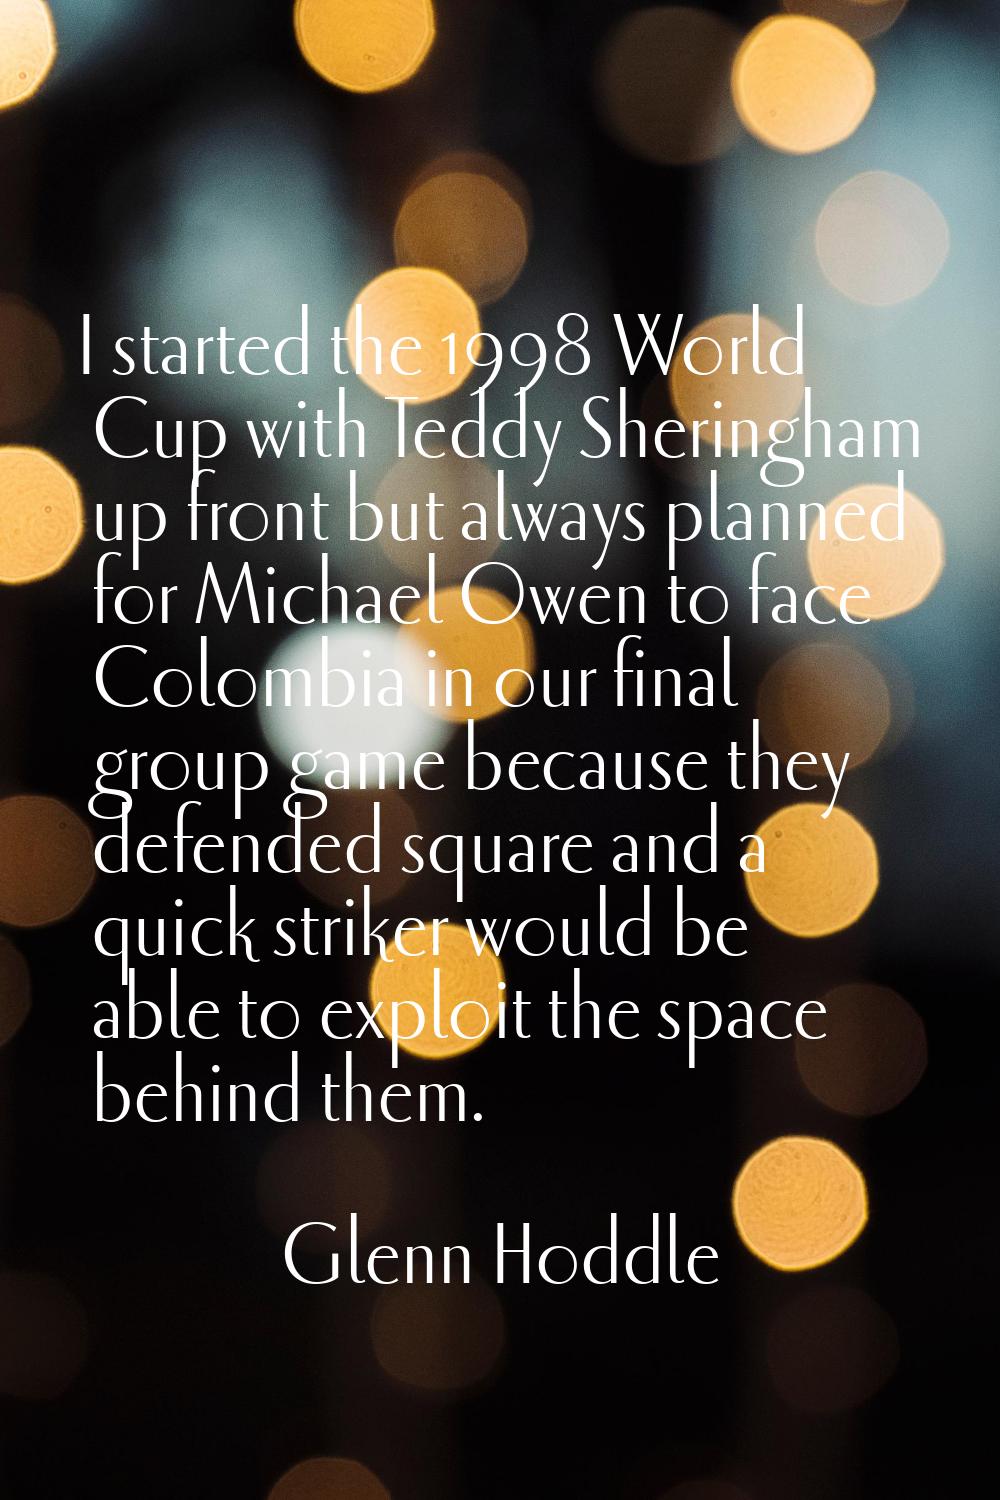 I started the 1998 World Cup with Teddy Sheringham up front but always planned for Michael Owen to 